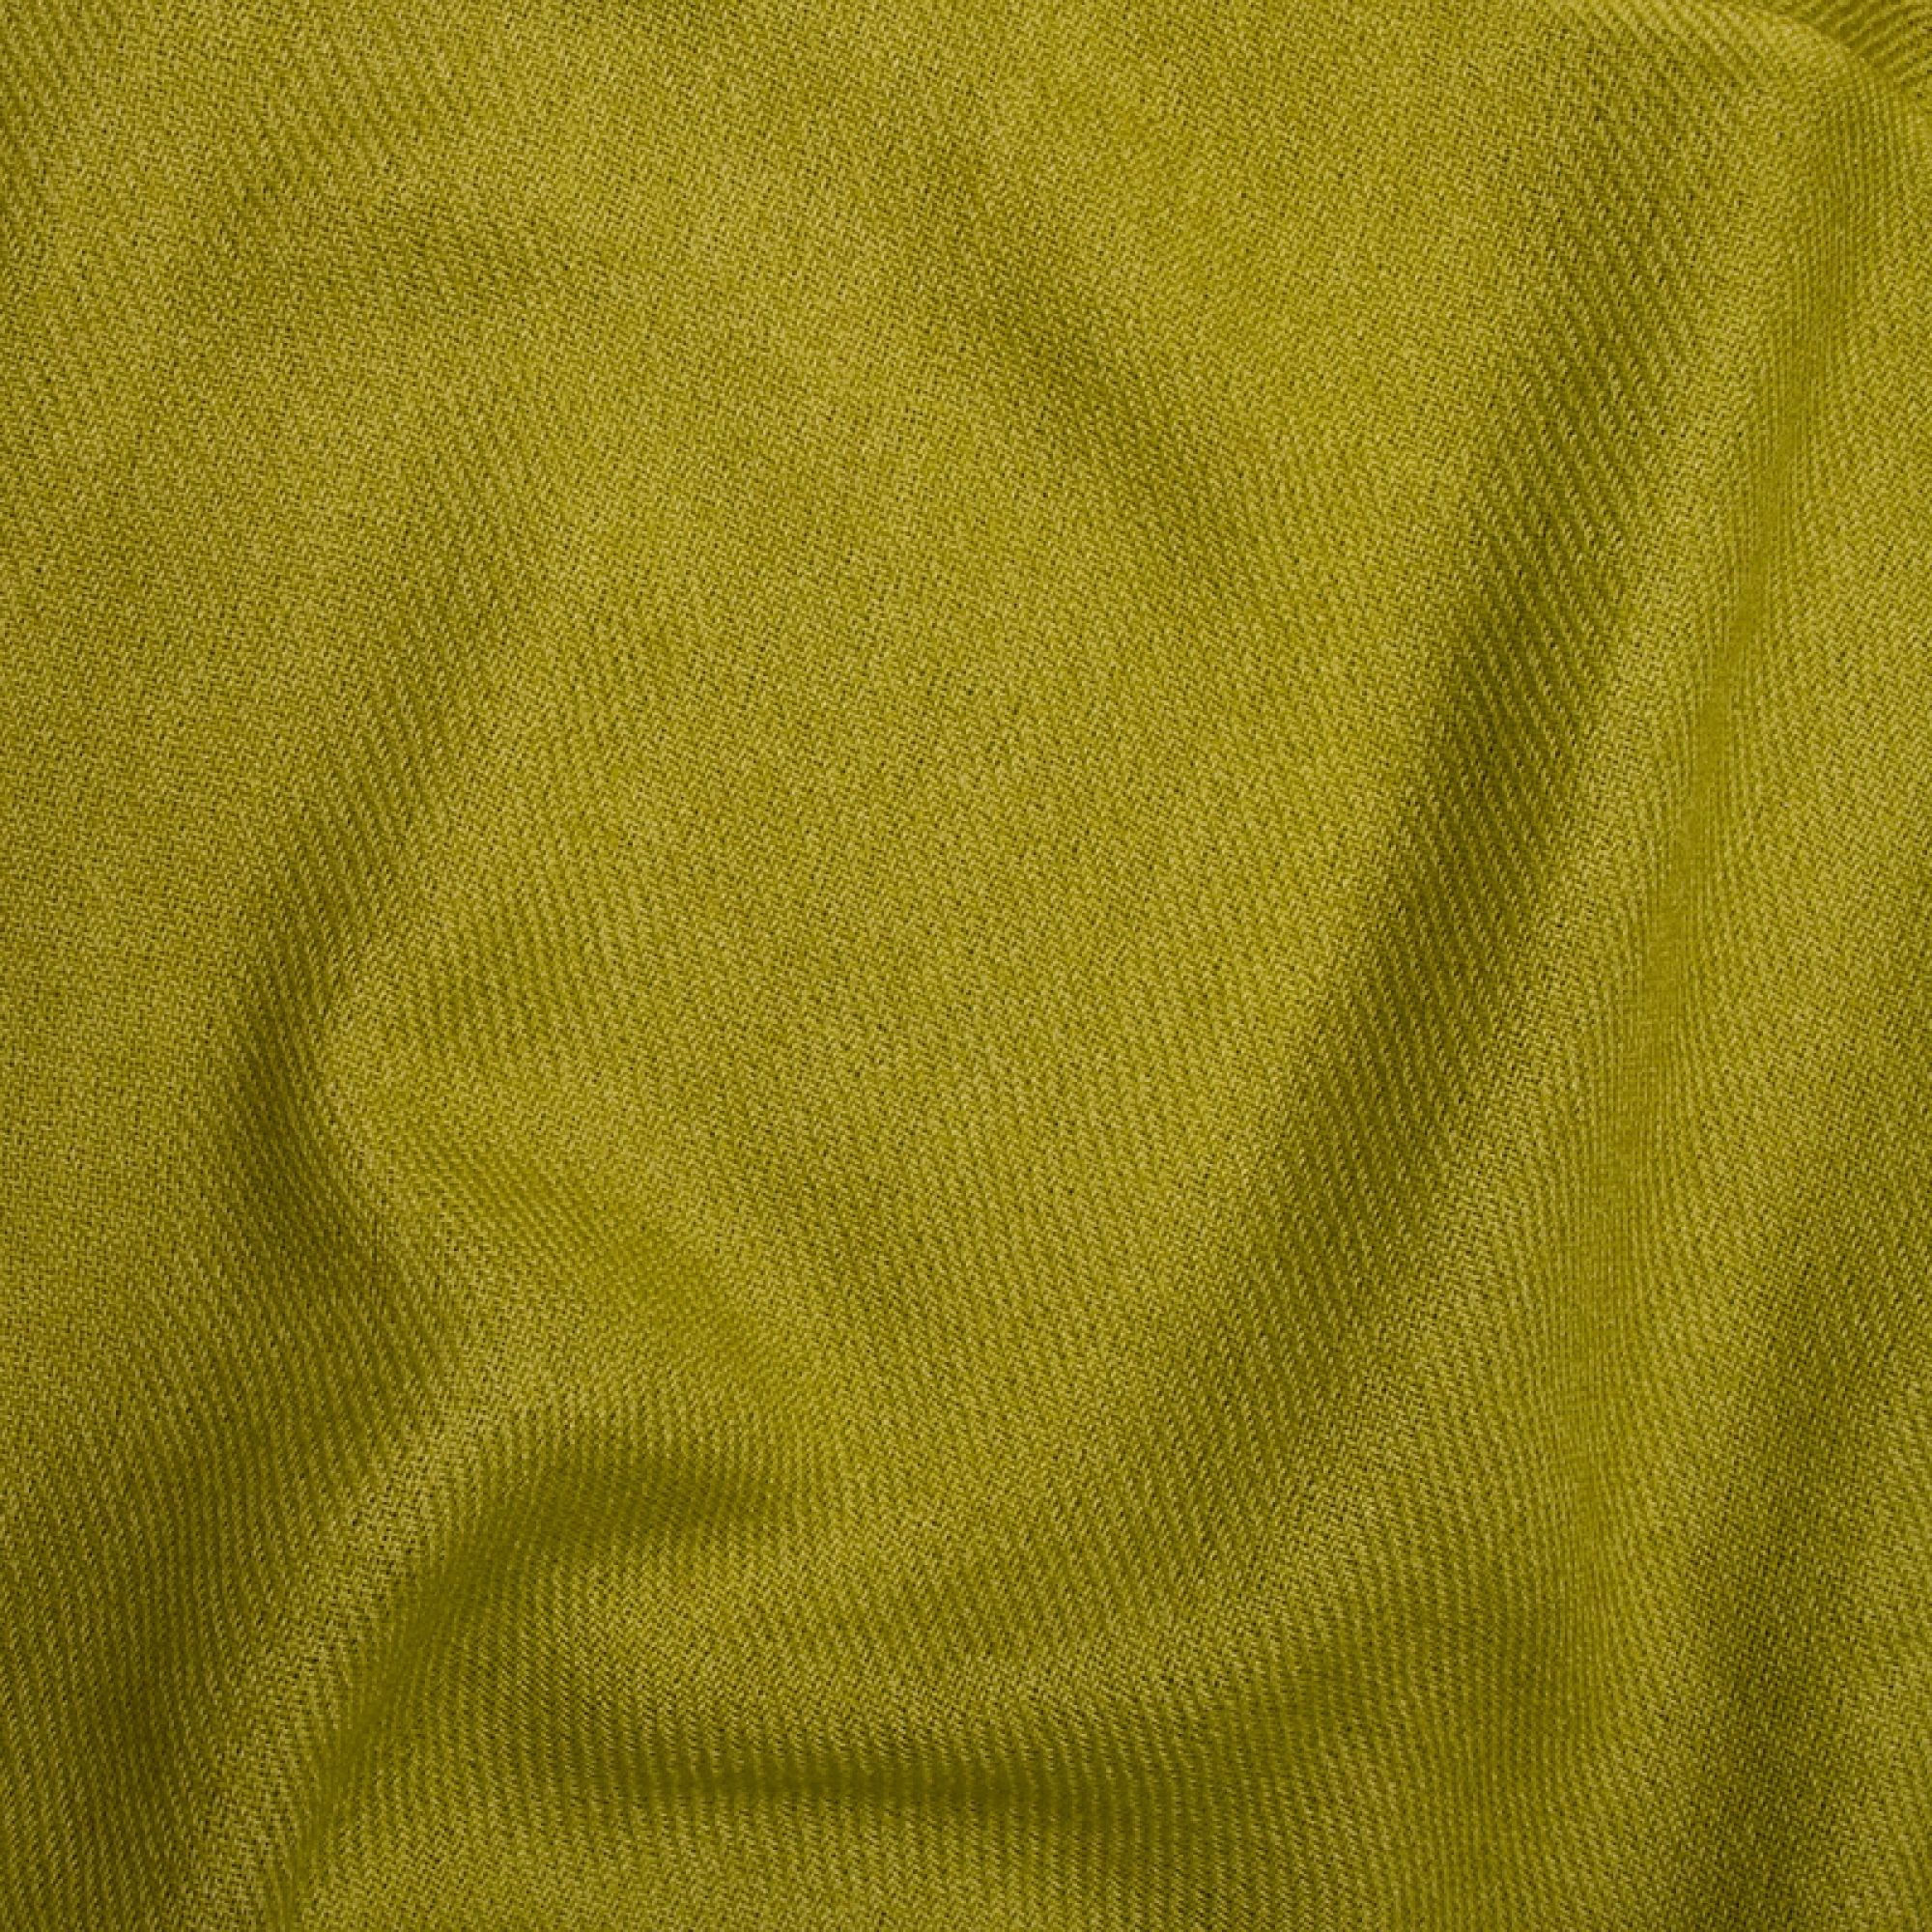 Cashmere accessories blanket toodoo plain m 180 x 220 lime punch 180 x 220 cm